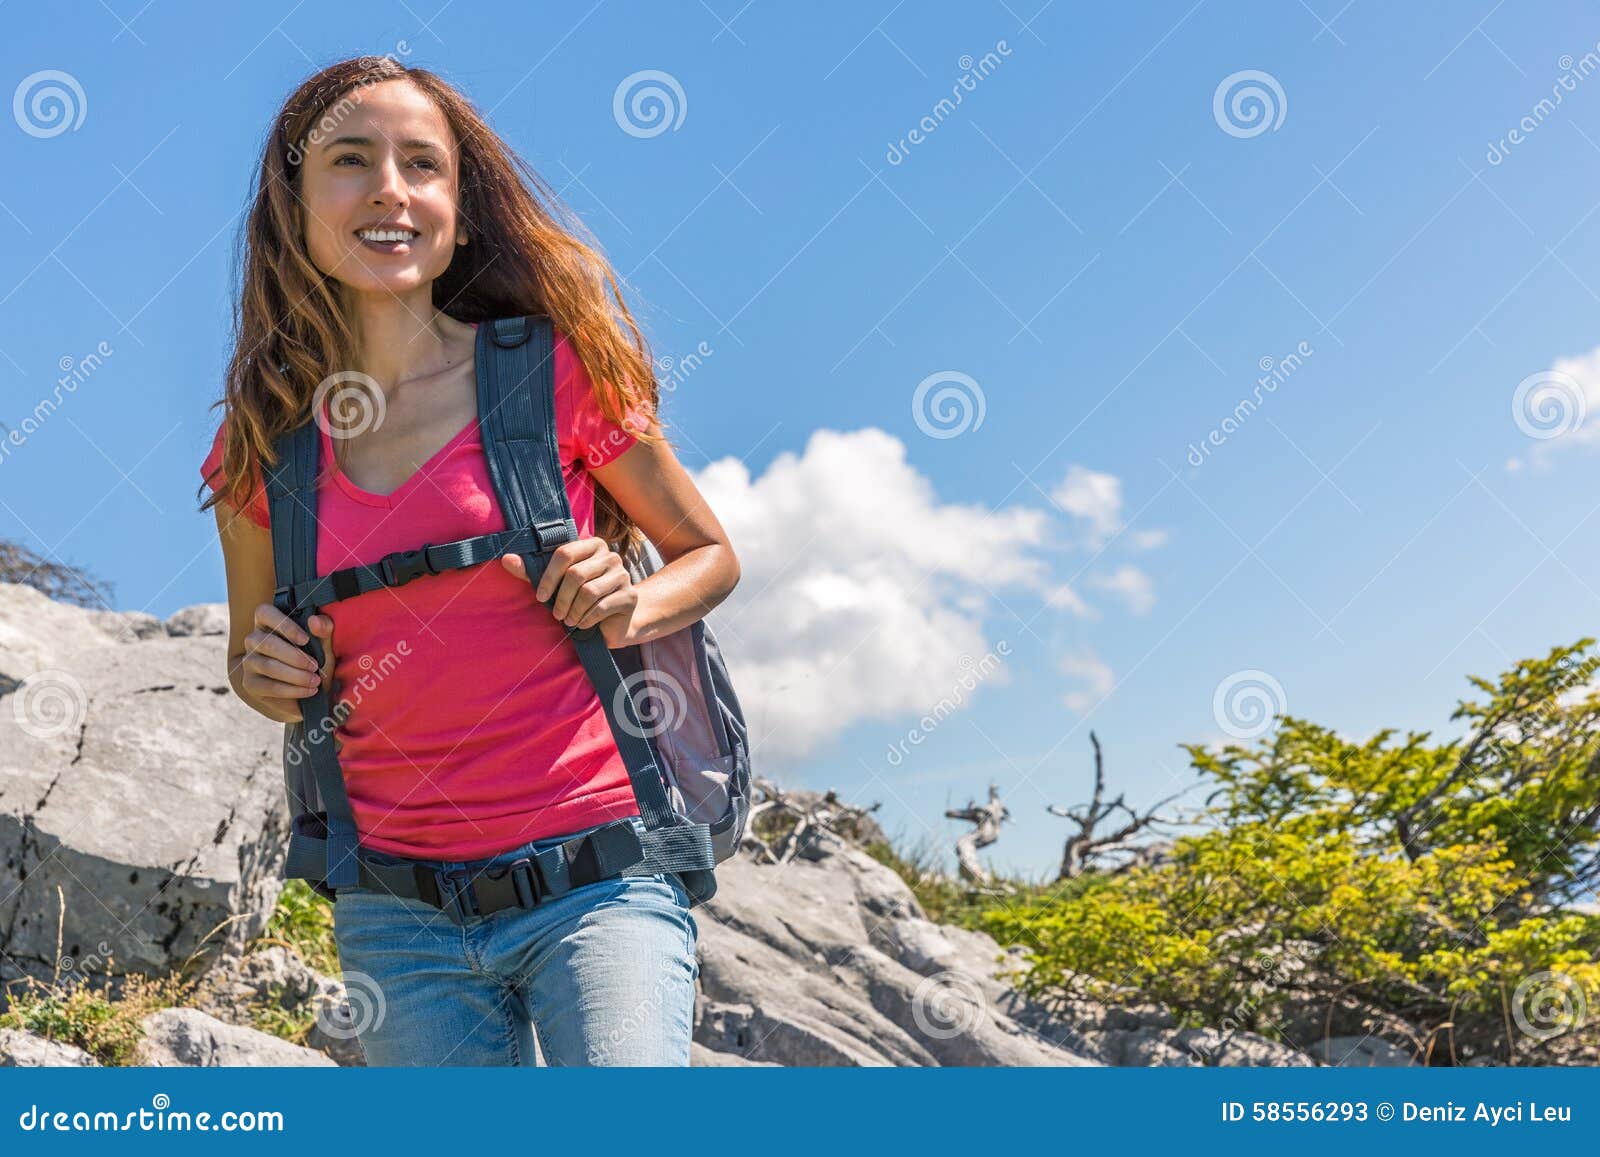 Hiker woman stock image. Image of people, hike, relaxing - 58556293